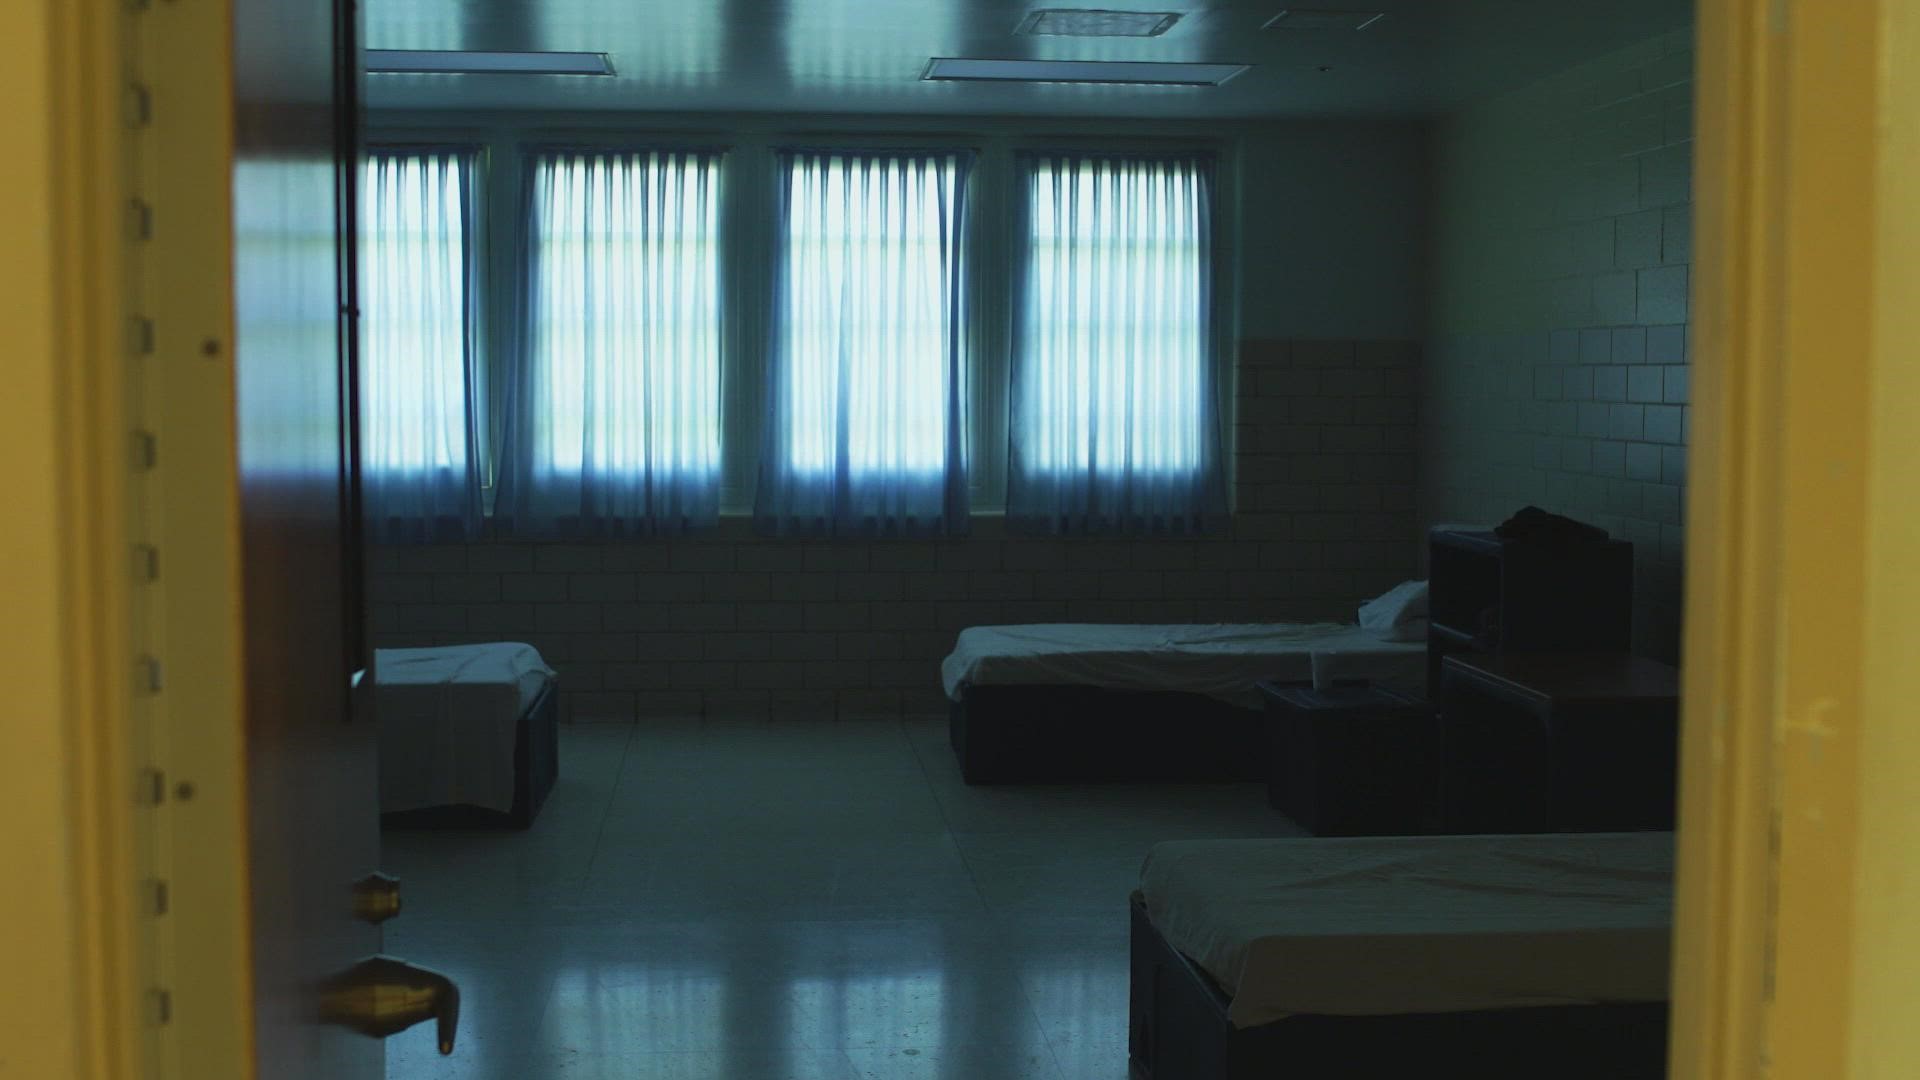 Hundreds of prisoners in the Dallas County jail are waiting more than two years for a bed in a state mental hospital.